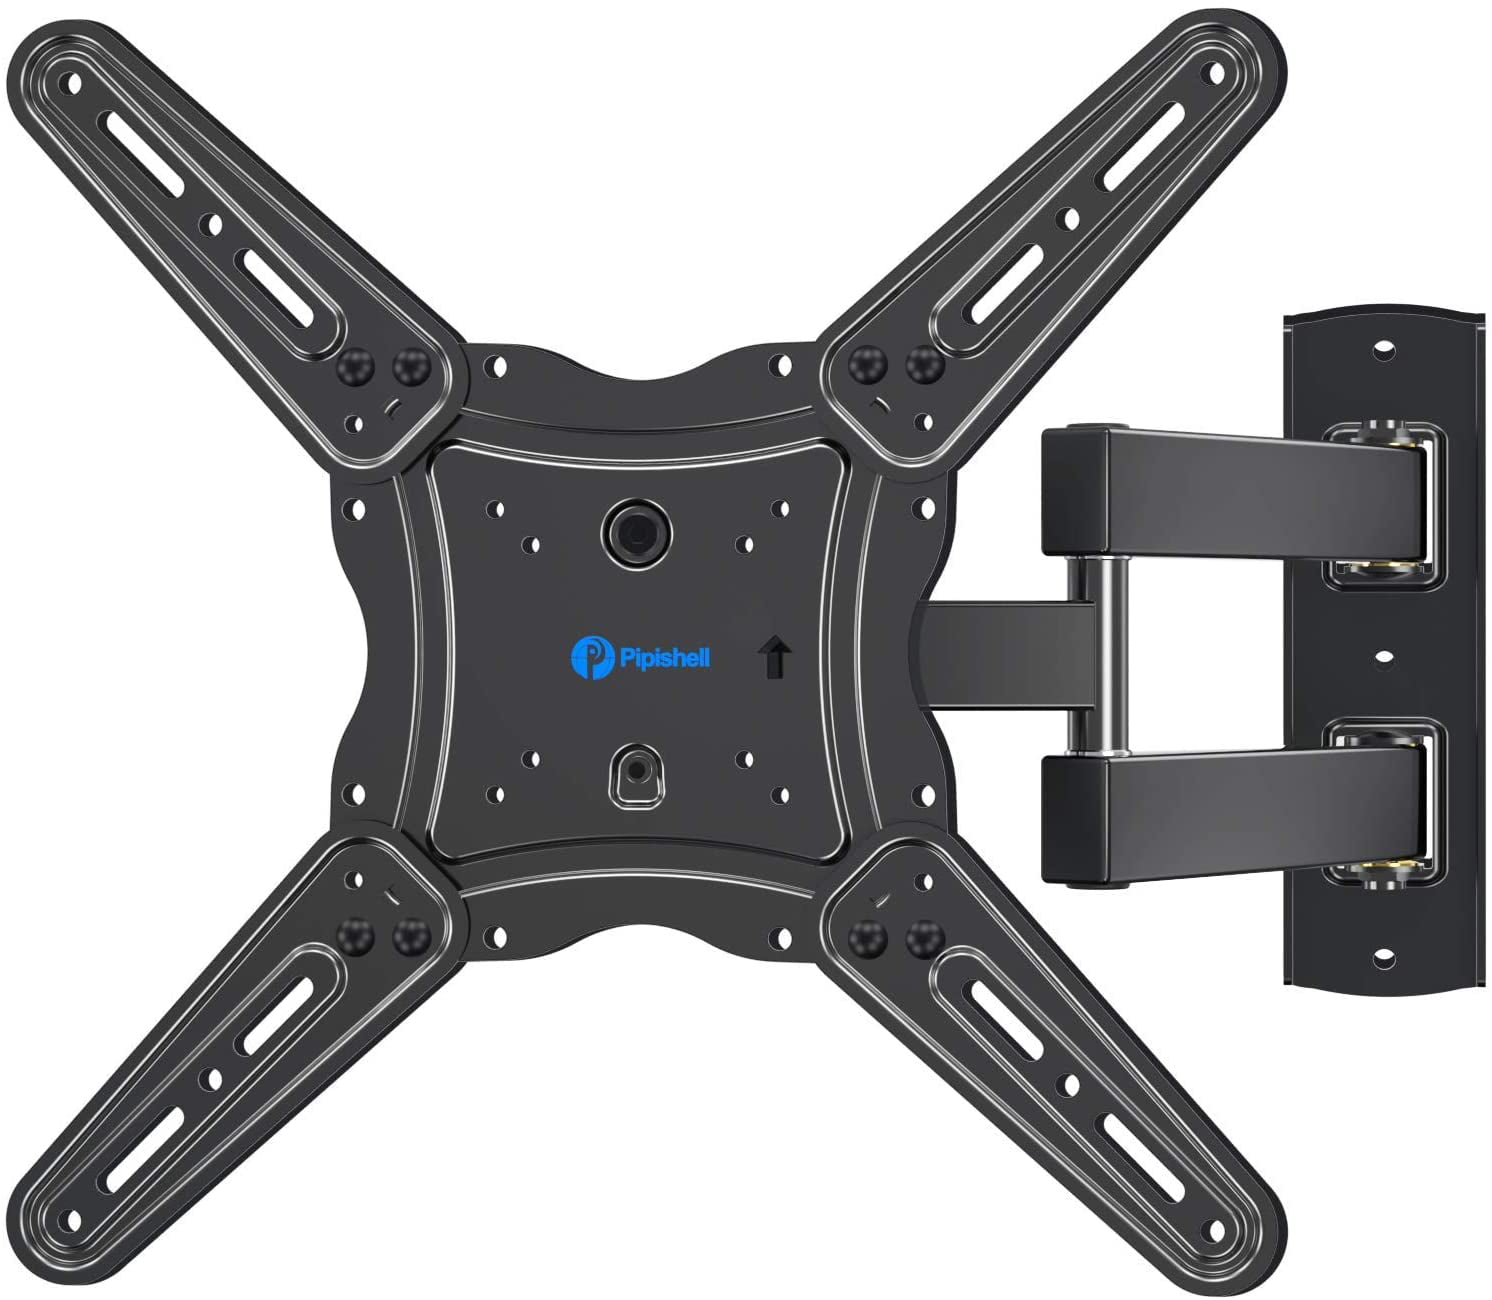 Tilts & Extends TV Mount Bracket with Max VESA 400x400mm and up to 66lbs Fits LED LCD 4K TVs Articulating Arms Swivels OLED Full Motion TV Wall Mount for Most 28-55 Inch Flat Curved Screen TVs 